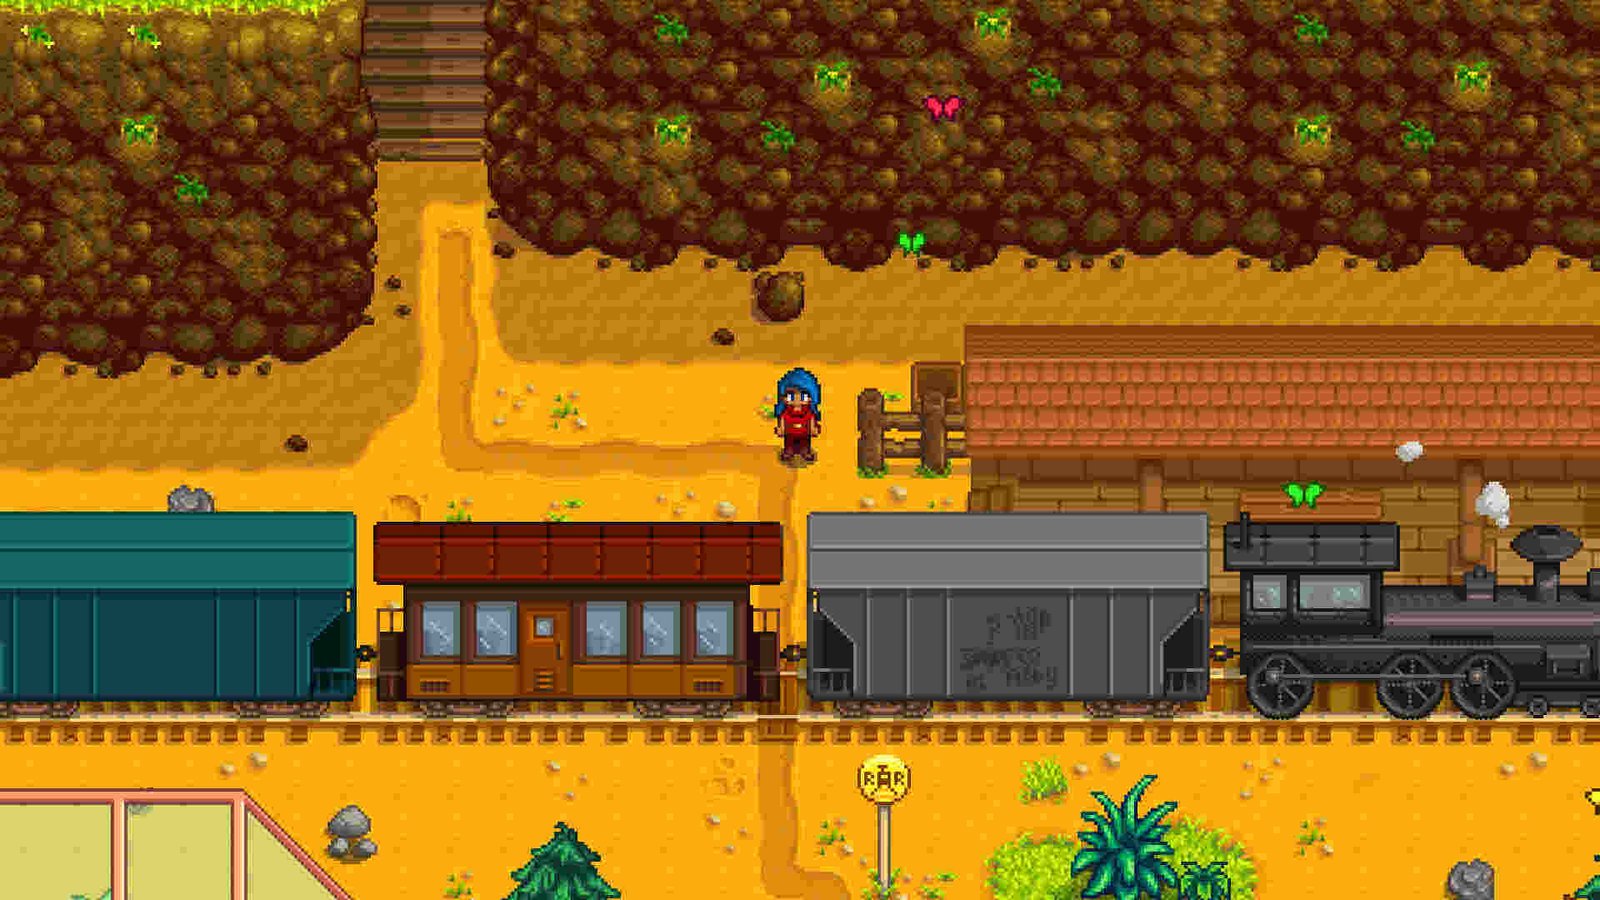 What do the dots mean in Stardew Valley?